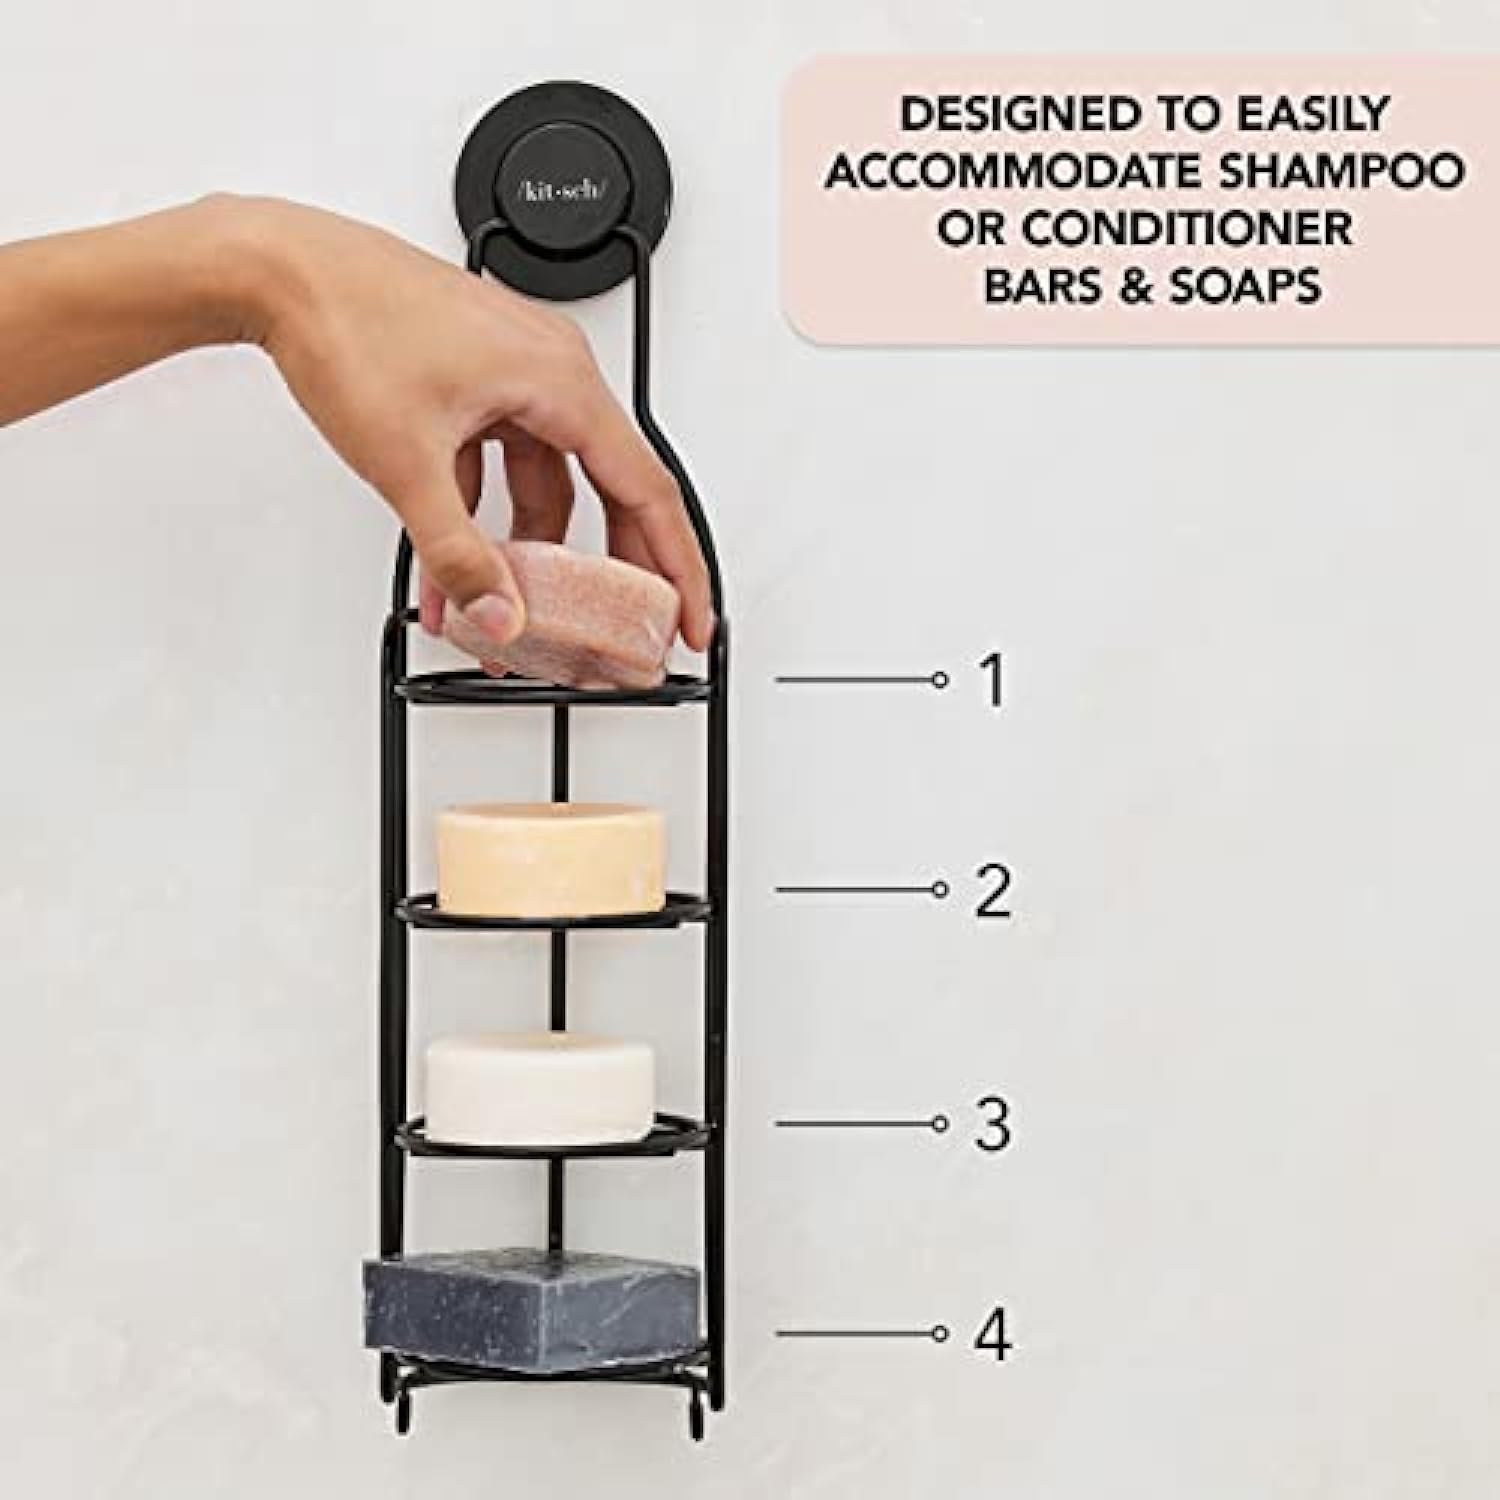 New Arrival 3 Pack Self Adhesive Shower Caddy Organizer with Soap